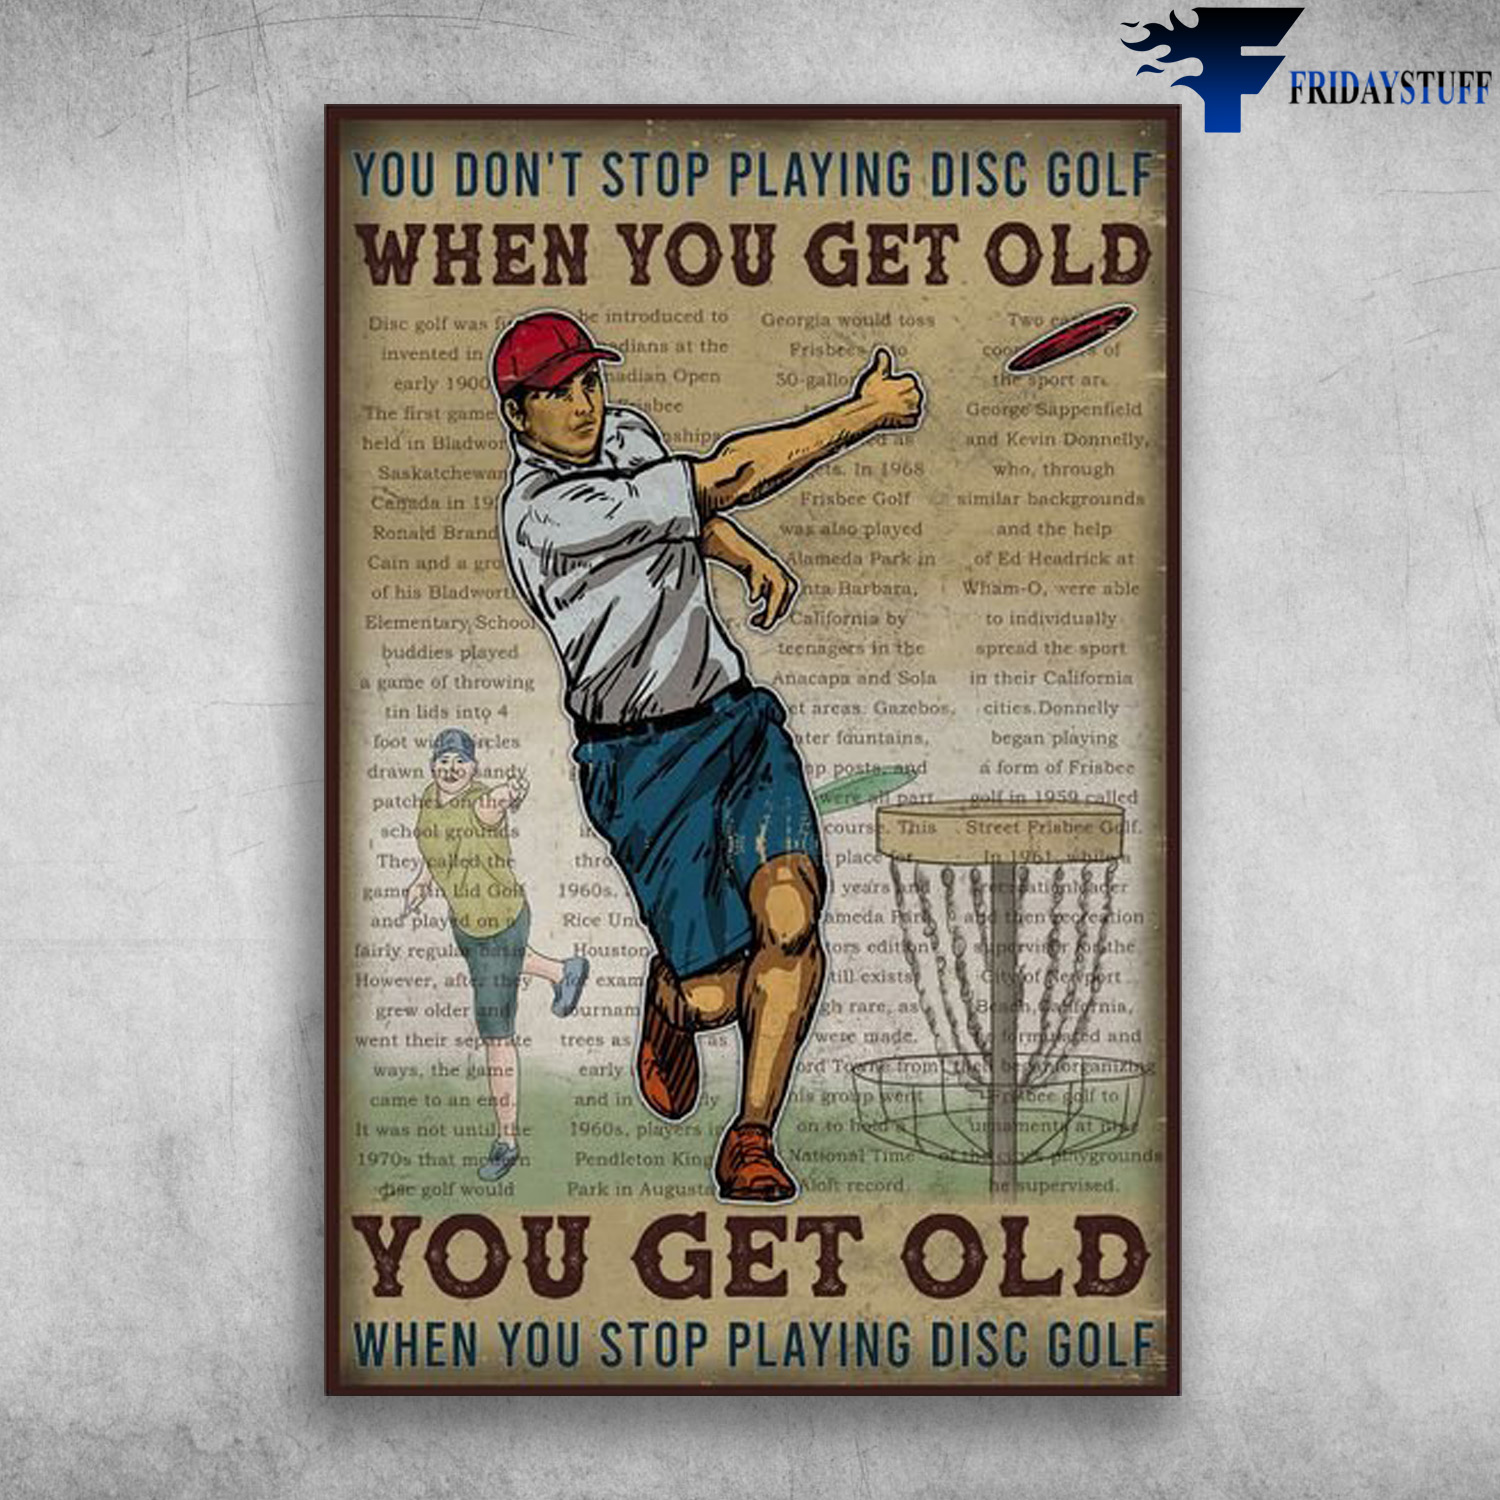 Man Playing Disc Golf - You Don't Stop Playing Disc Golf When You Get Old, You Get Old When You Stop Playing Disc Golf